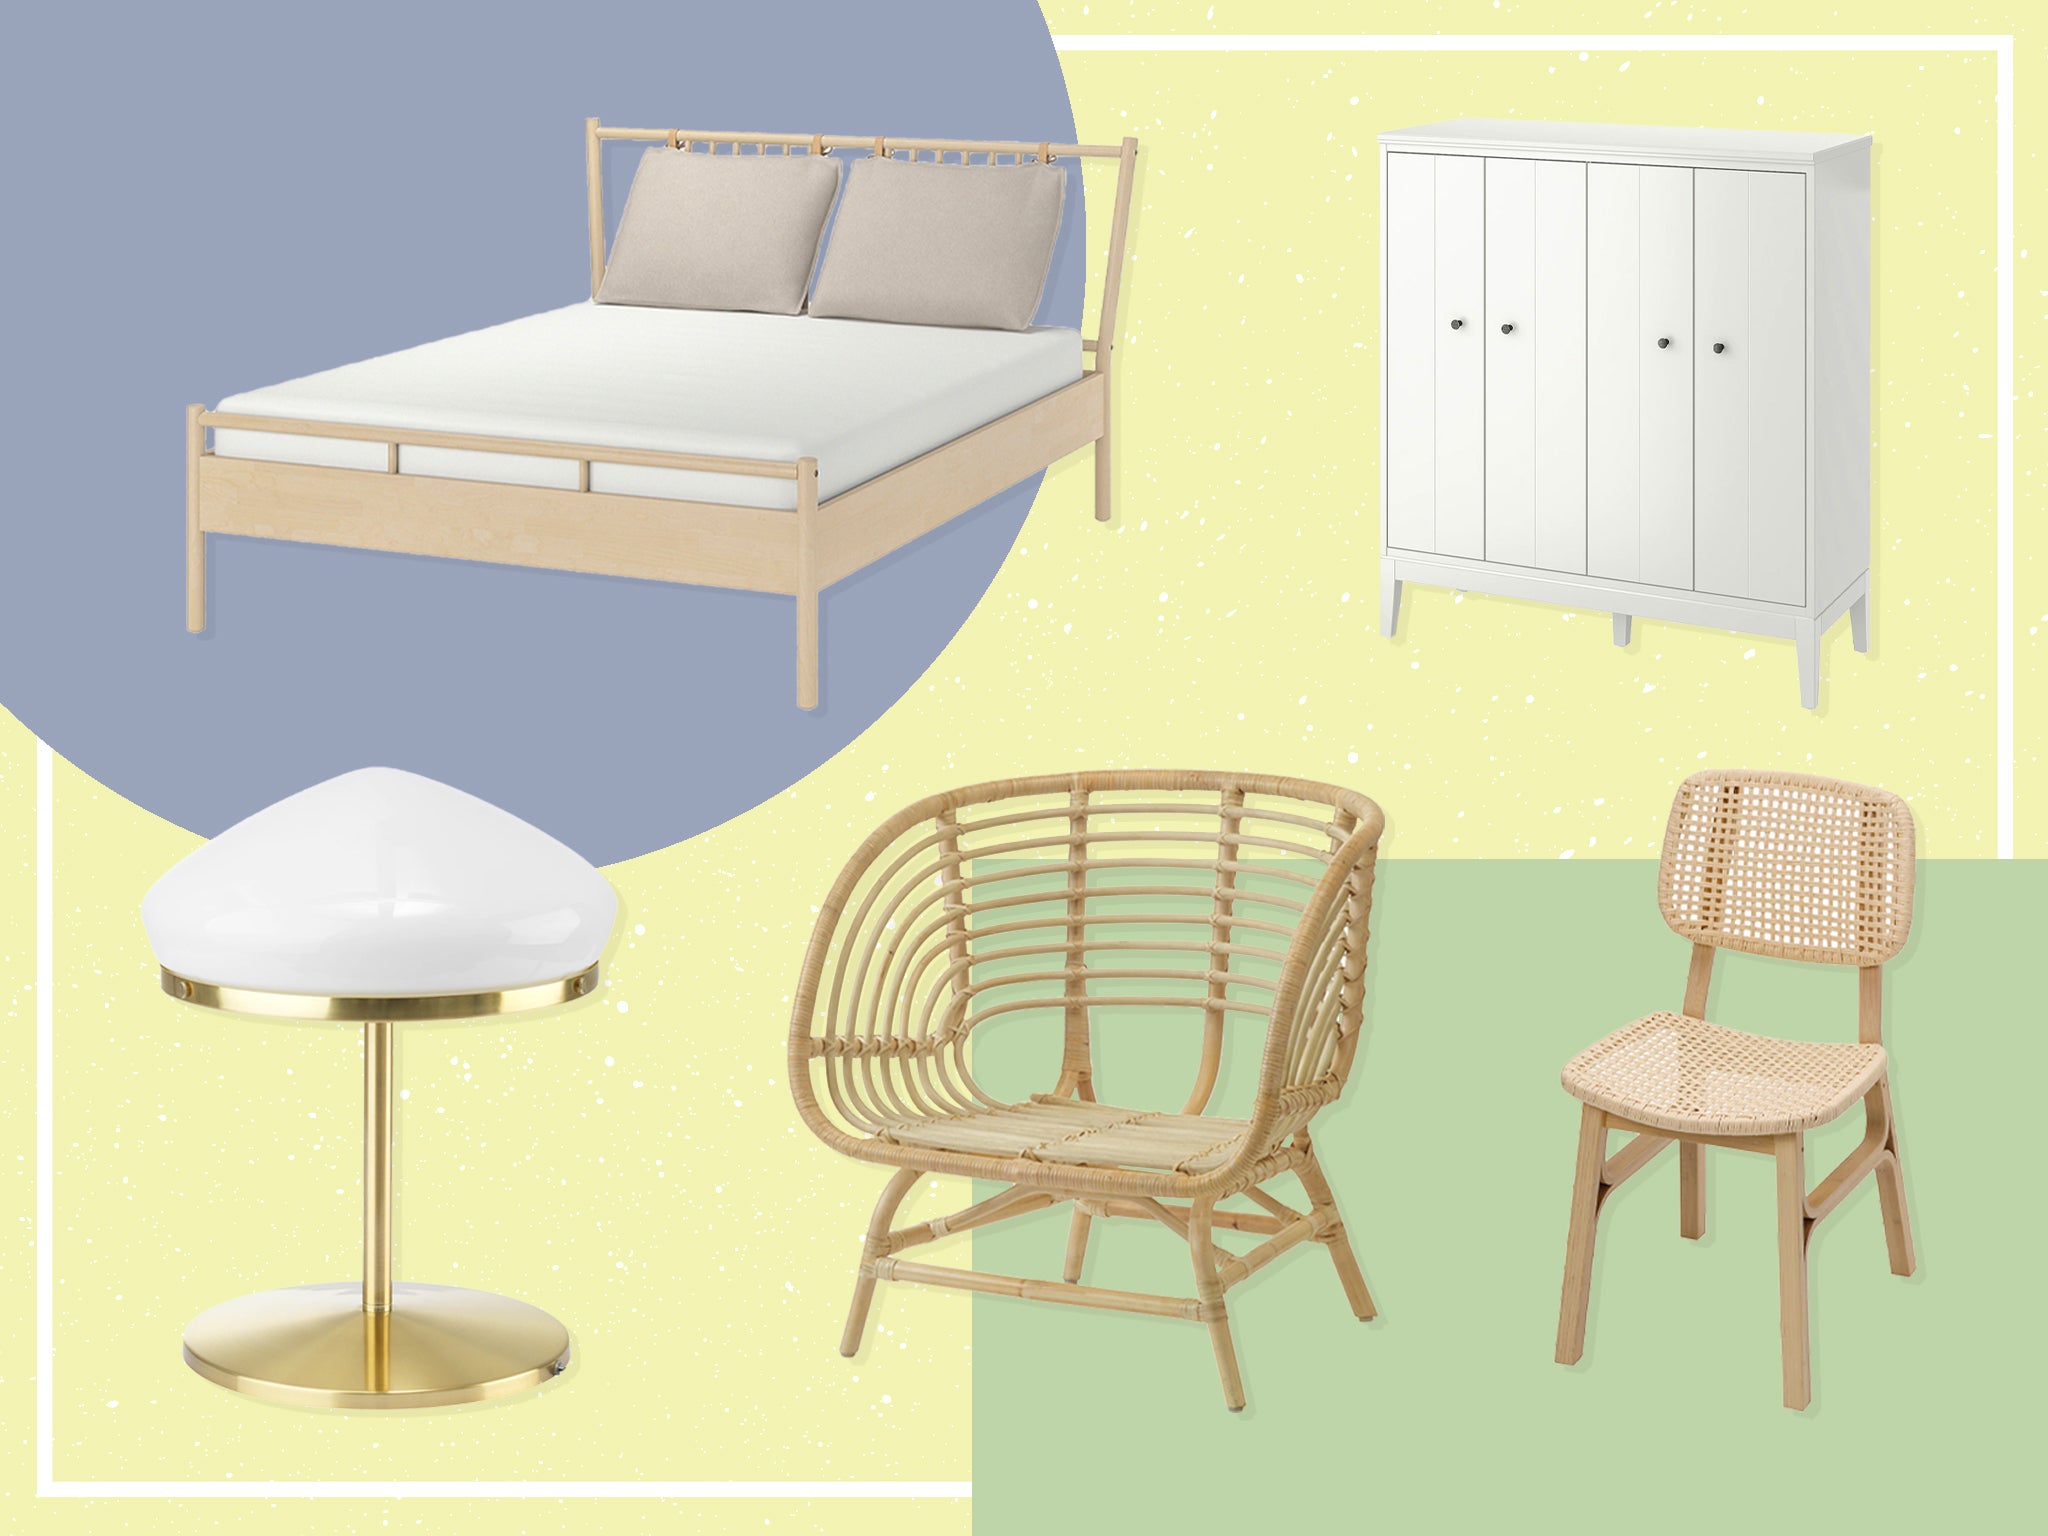 Doing up your home on a budget? Here’s affordable furniture that looks high end